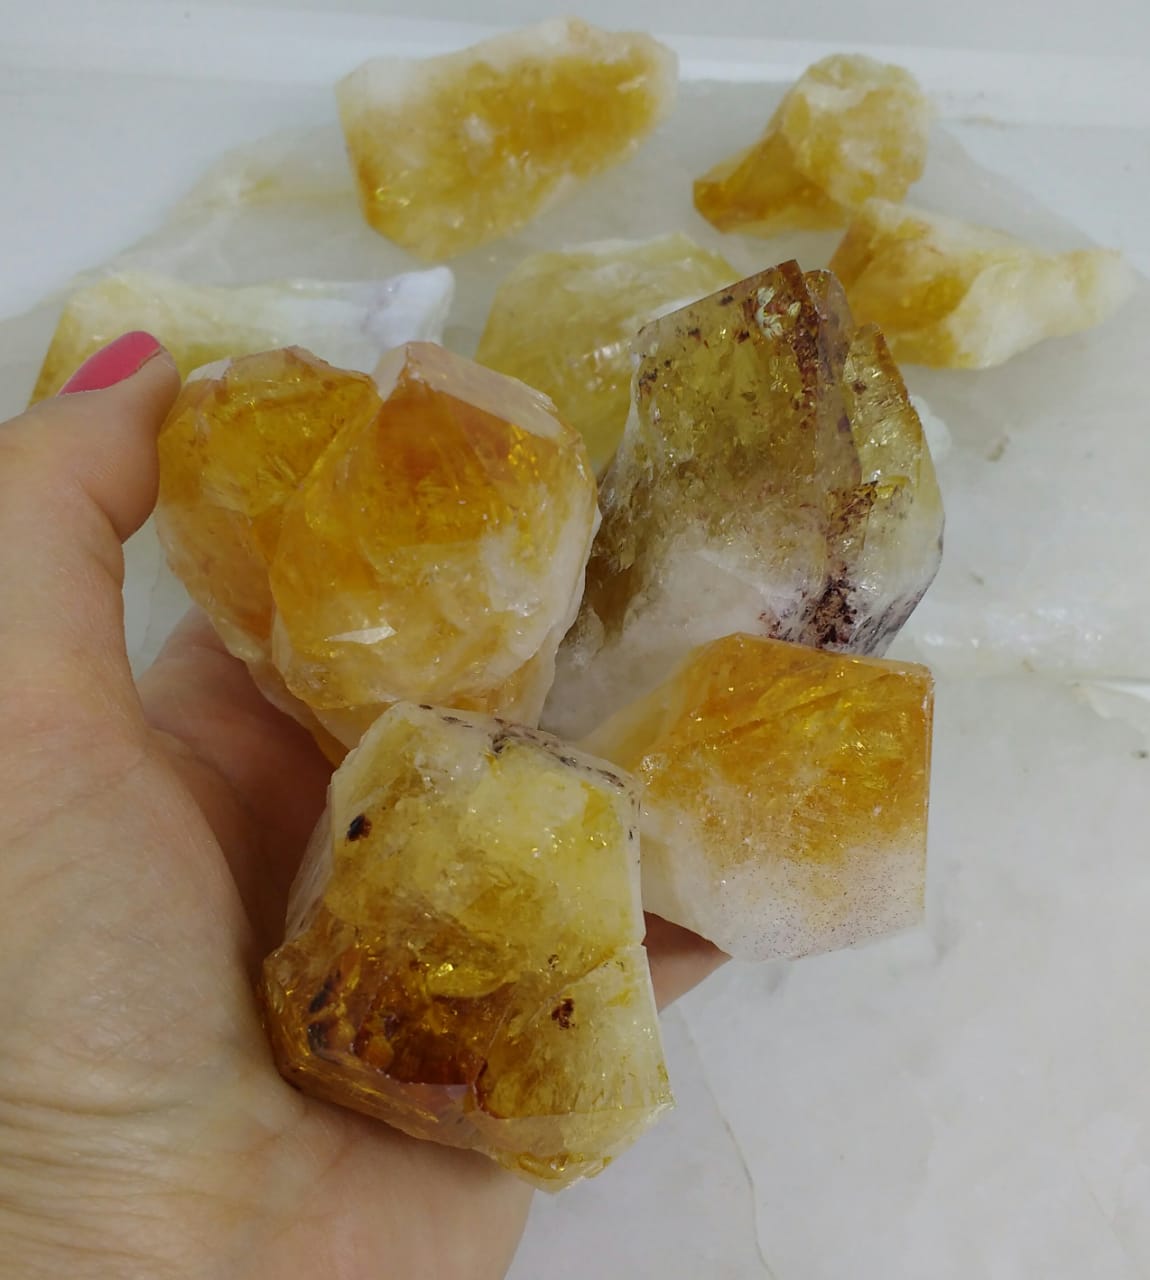 Stones from Uruguay - Large Rough Citrine Point  for  Energizes Life, Healing Citrine Crystals Stones for Reiki Energy Healing or Chakra Stones